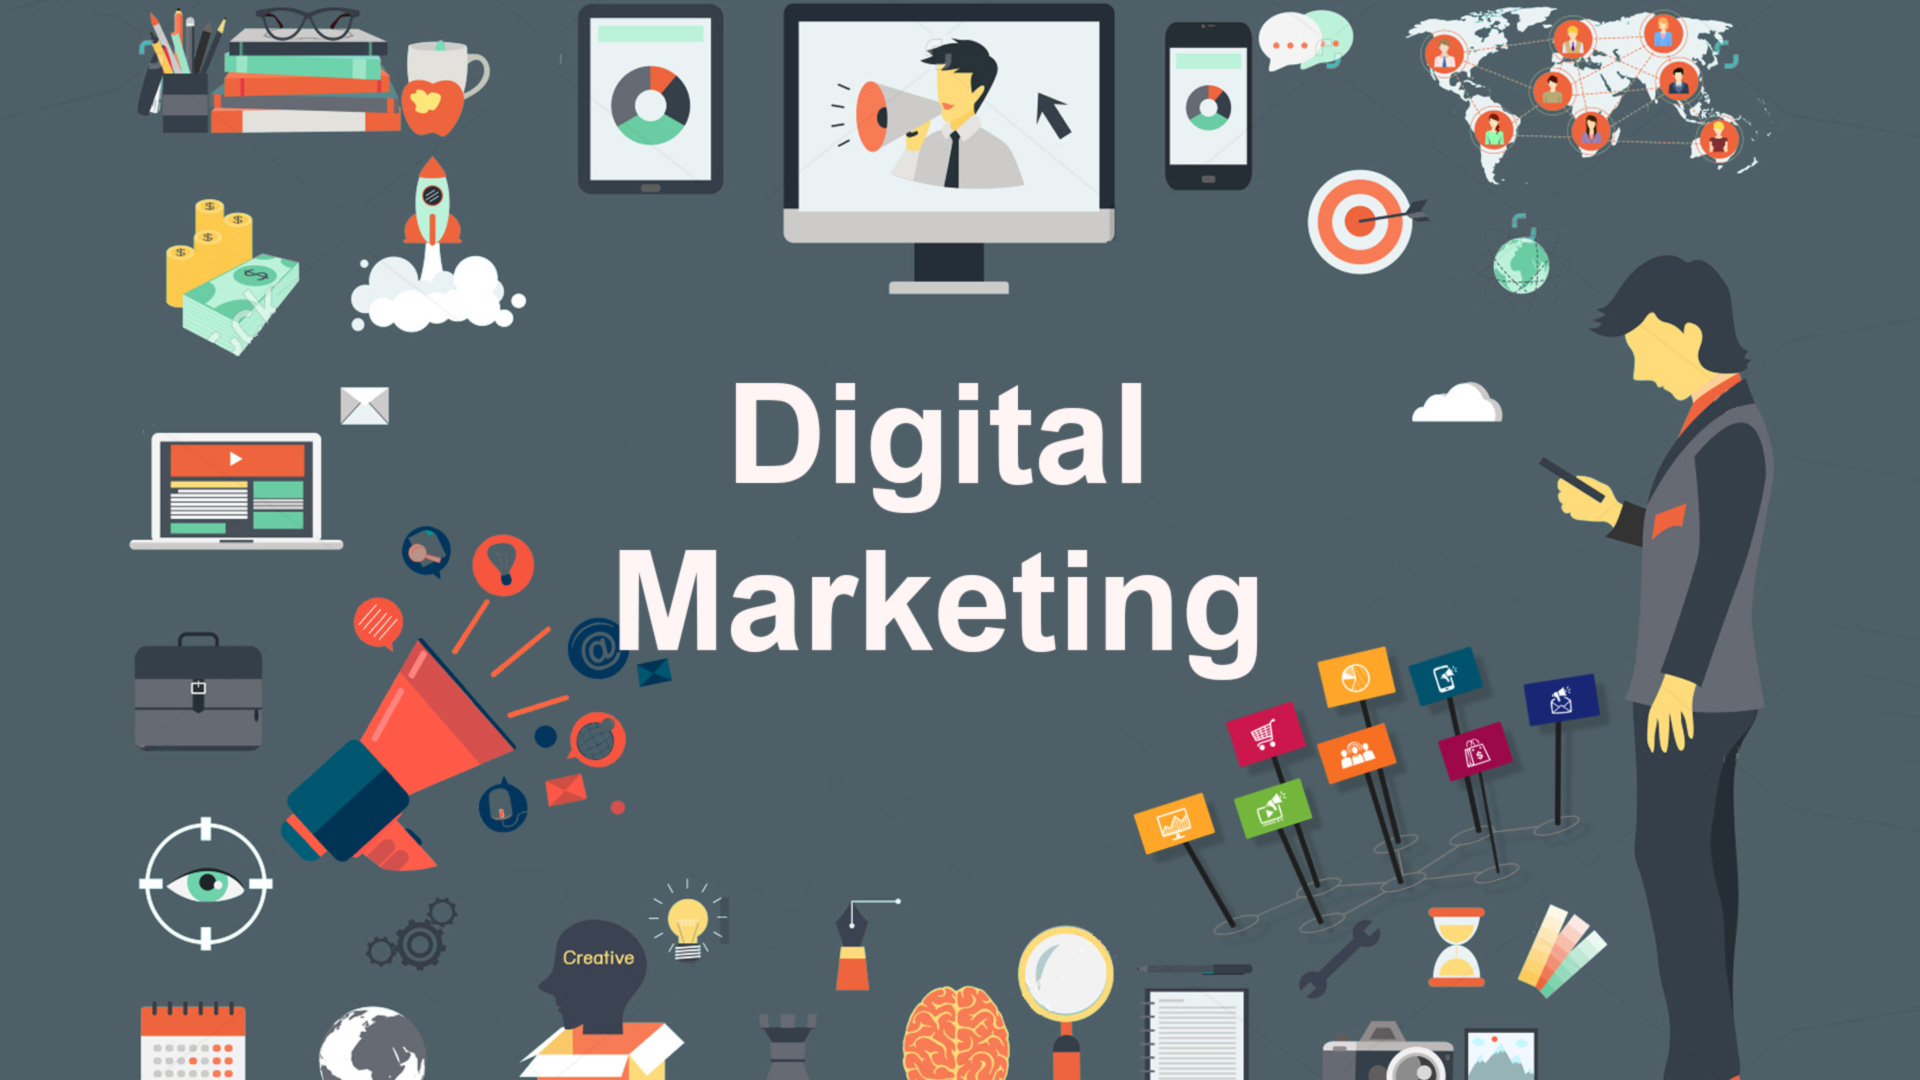 Why Choose a Digital Marketing Agency for Your Business